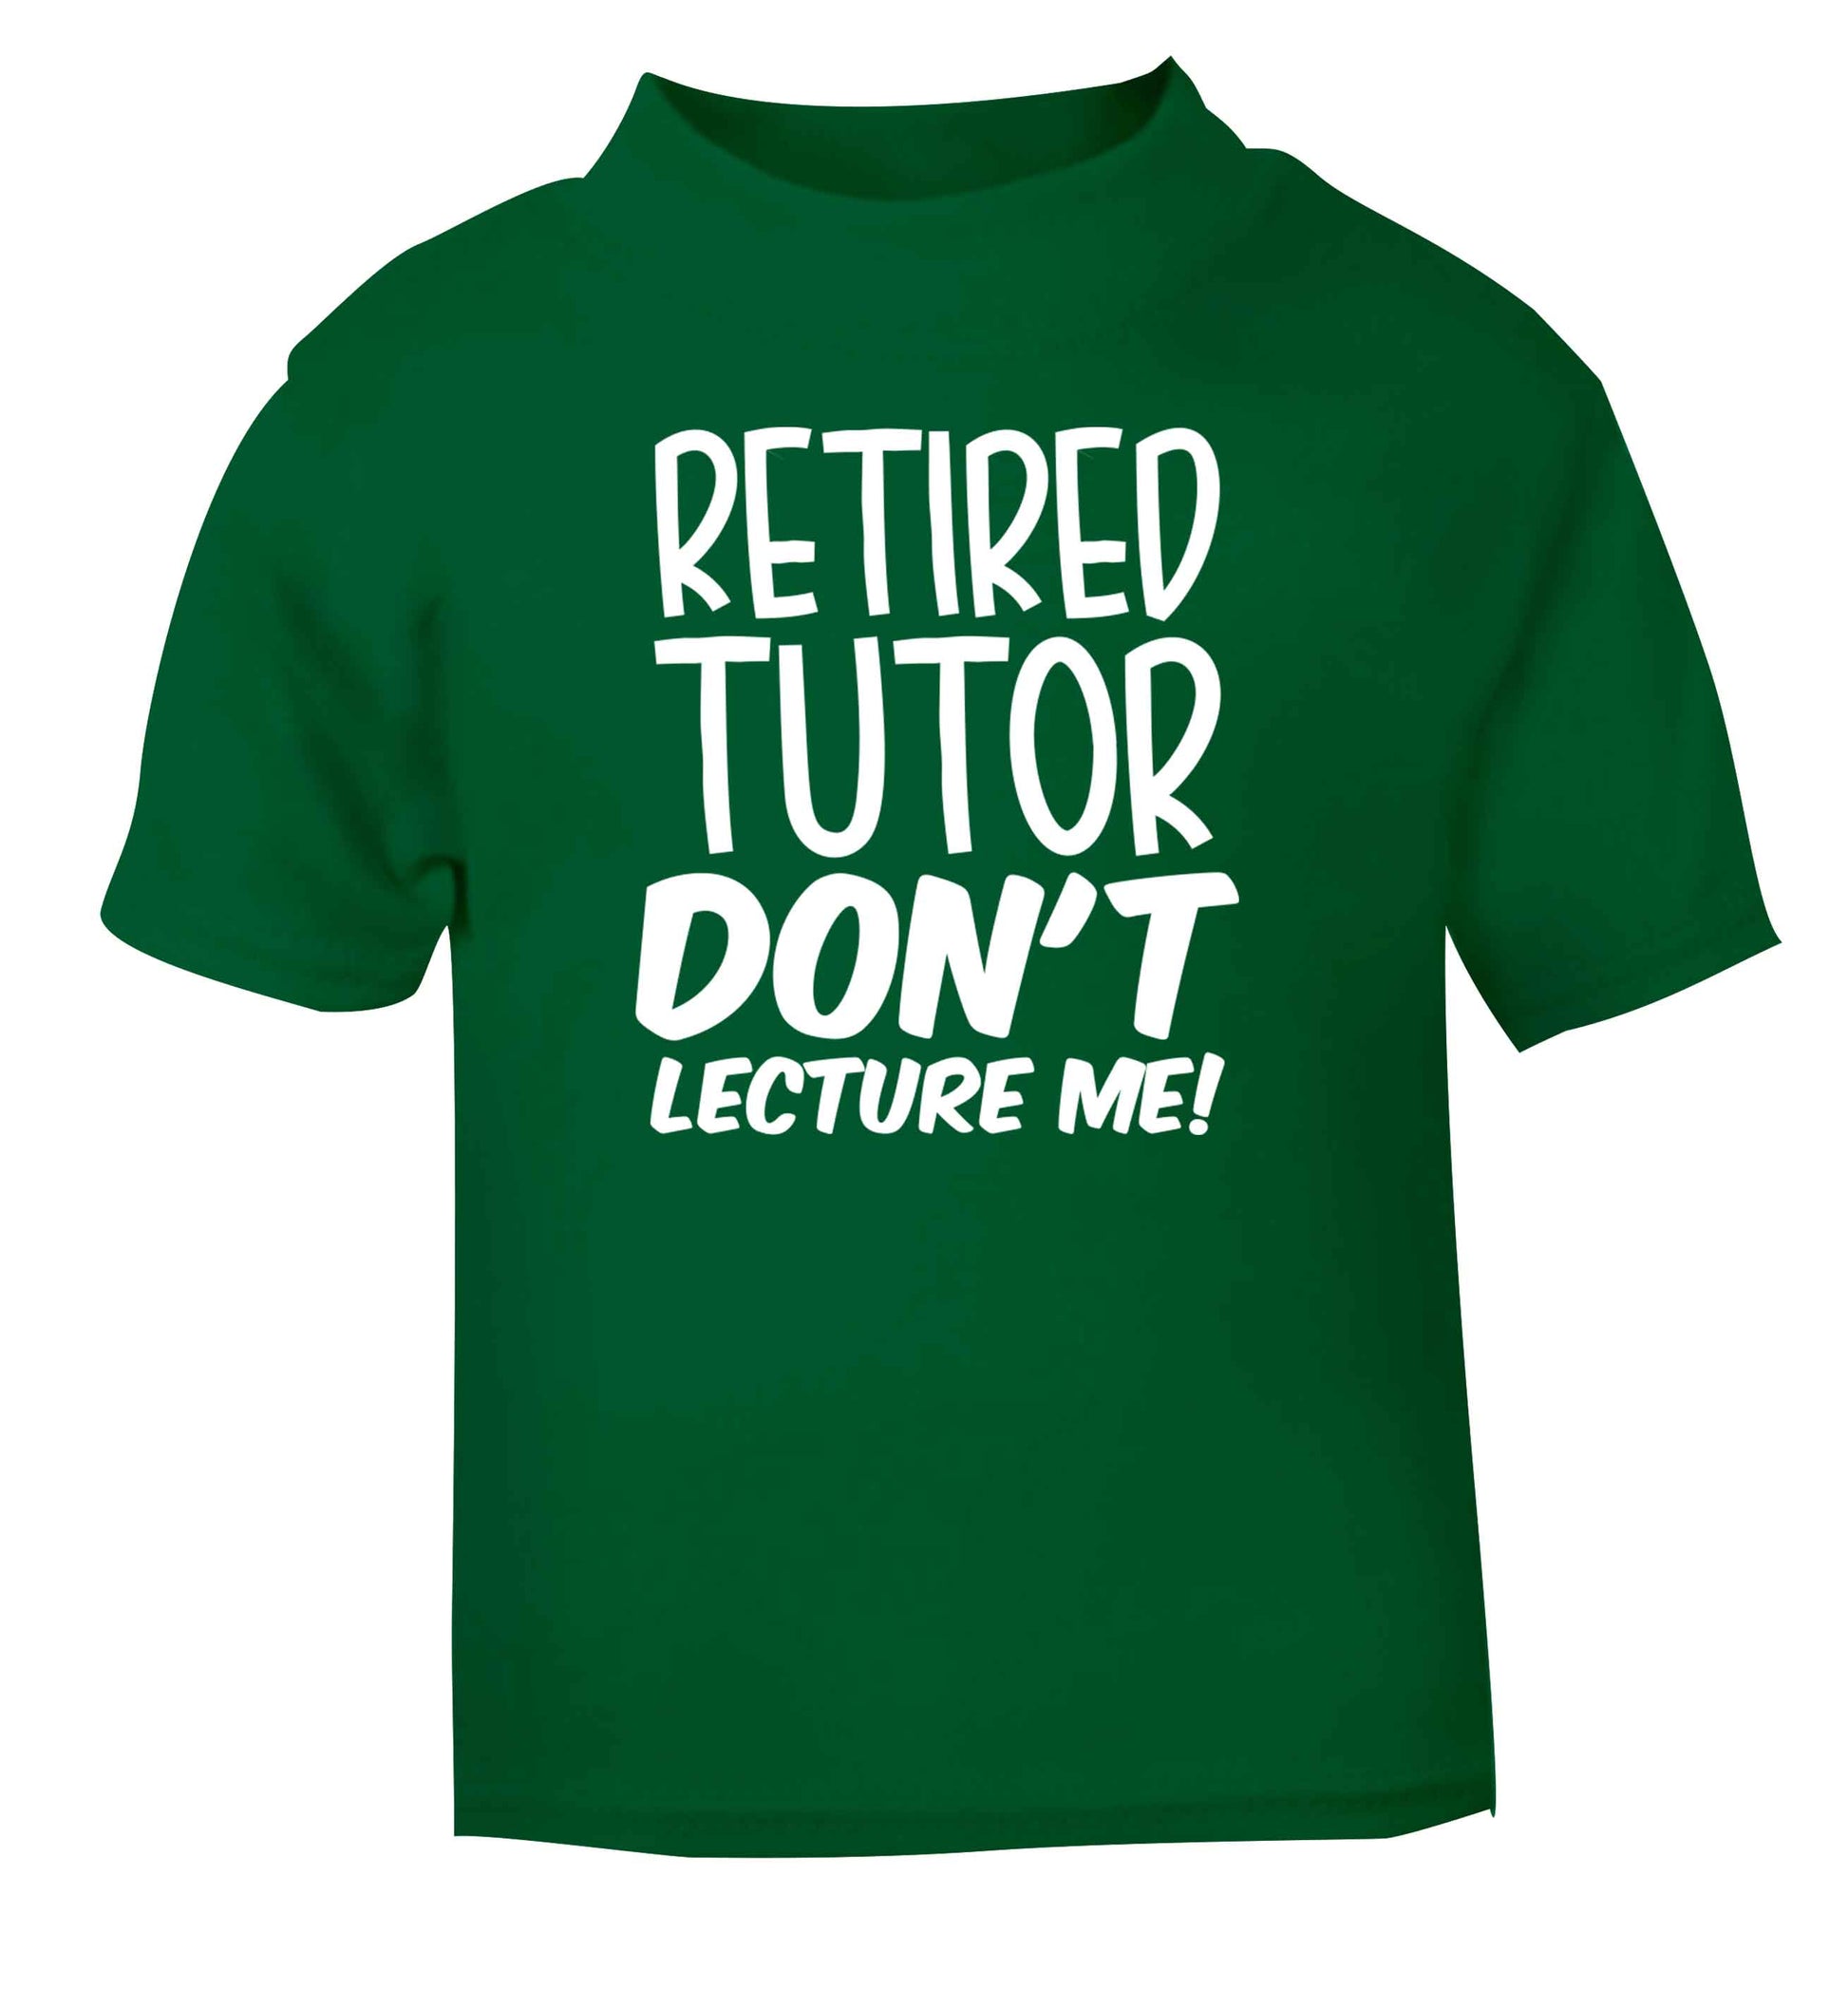 Retired tutor don't lecture me! green Baby Toddler Tshirt 2 Years